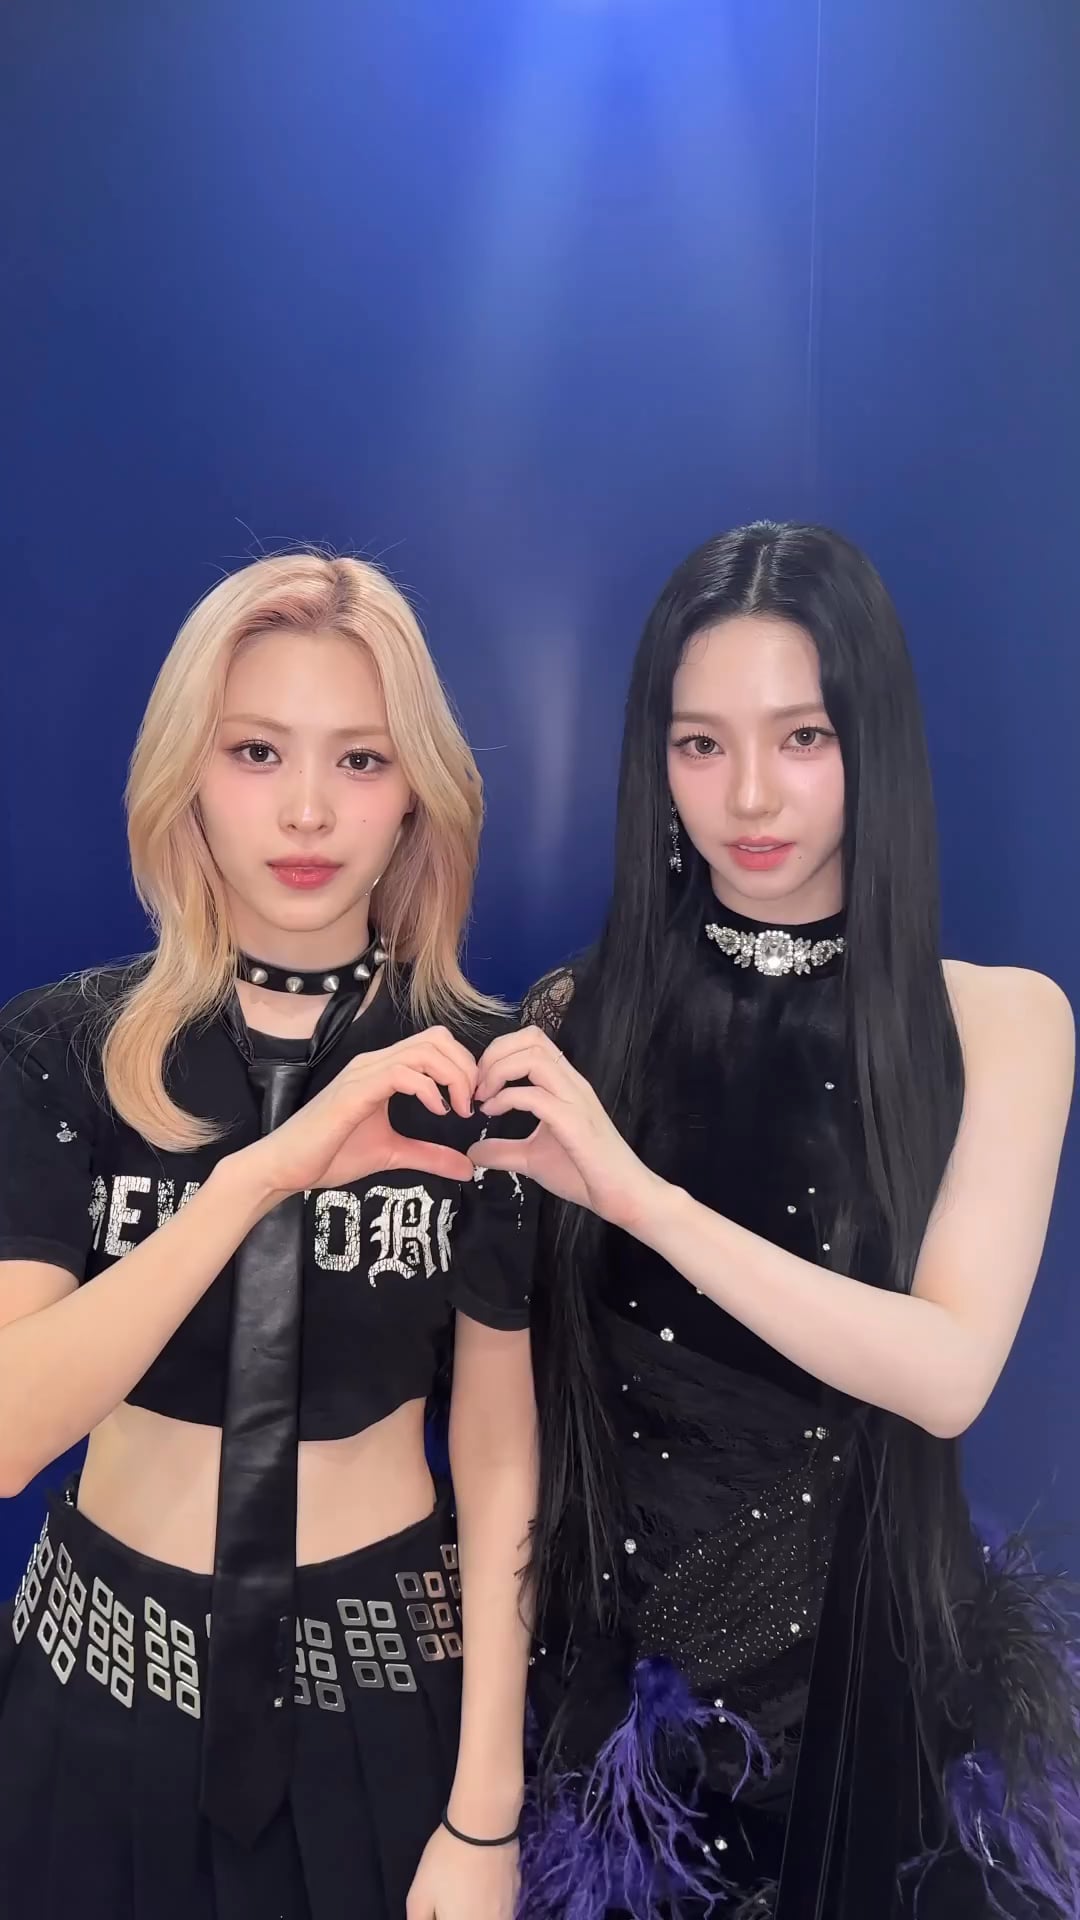 240108 ITZY TikTok Update with Karina - aespa Karina and ITZY Ryujin's untouchable face attack 🖤 This combination is like one #Drama ❤🔥 #UNTOUCHABLEChallenge